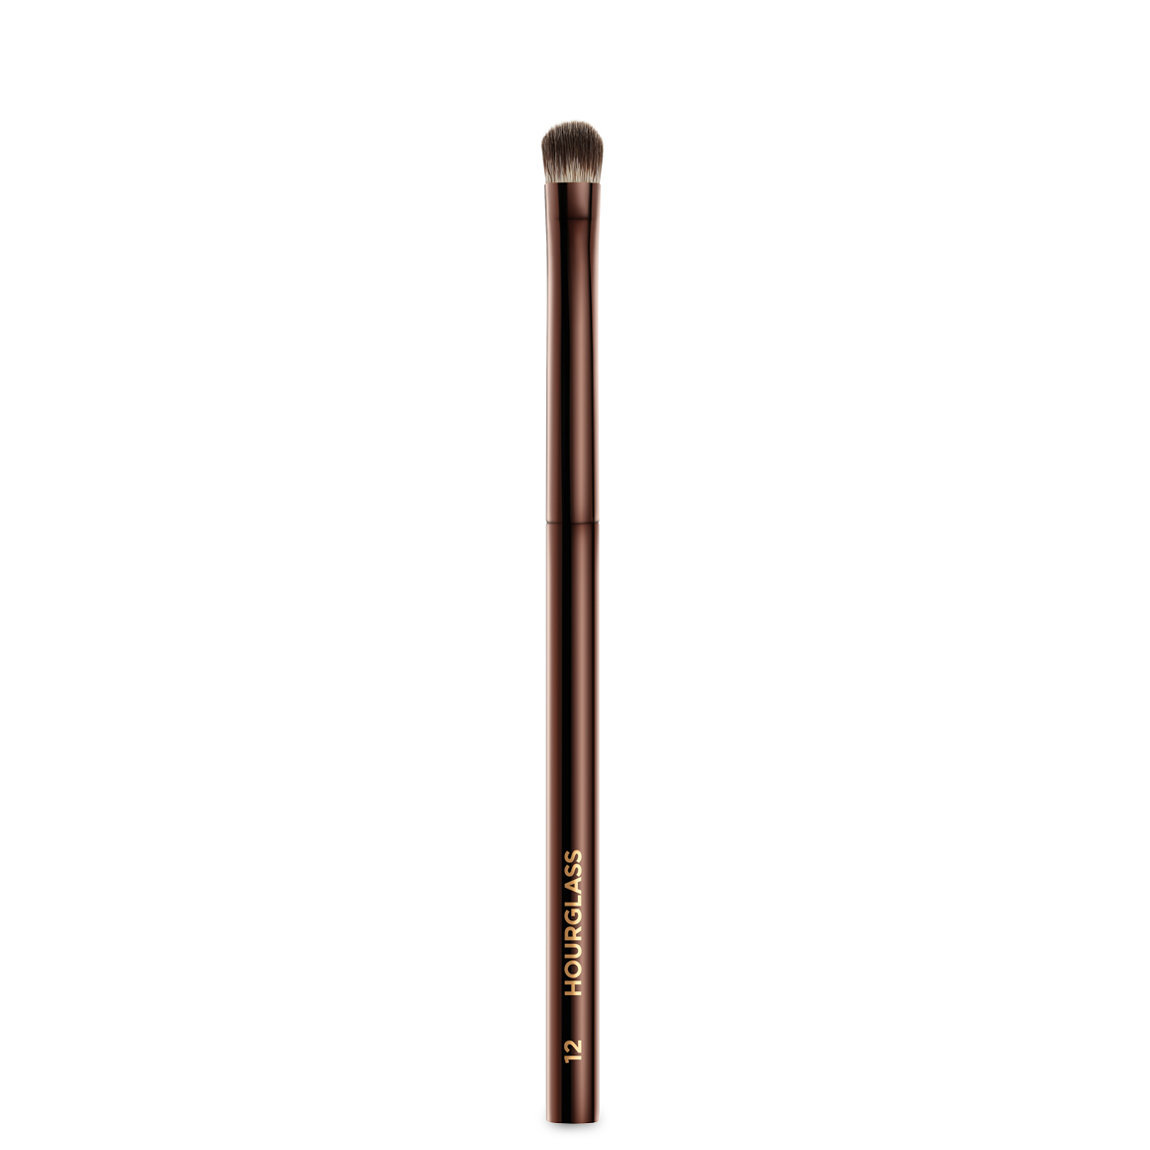 Hourglass N° 12 Beveled Shadow Brush alternative view 1 - product swatch.